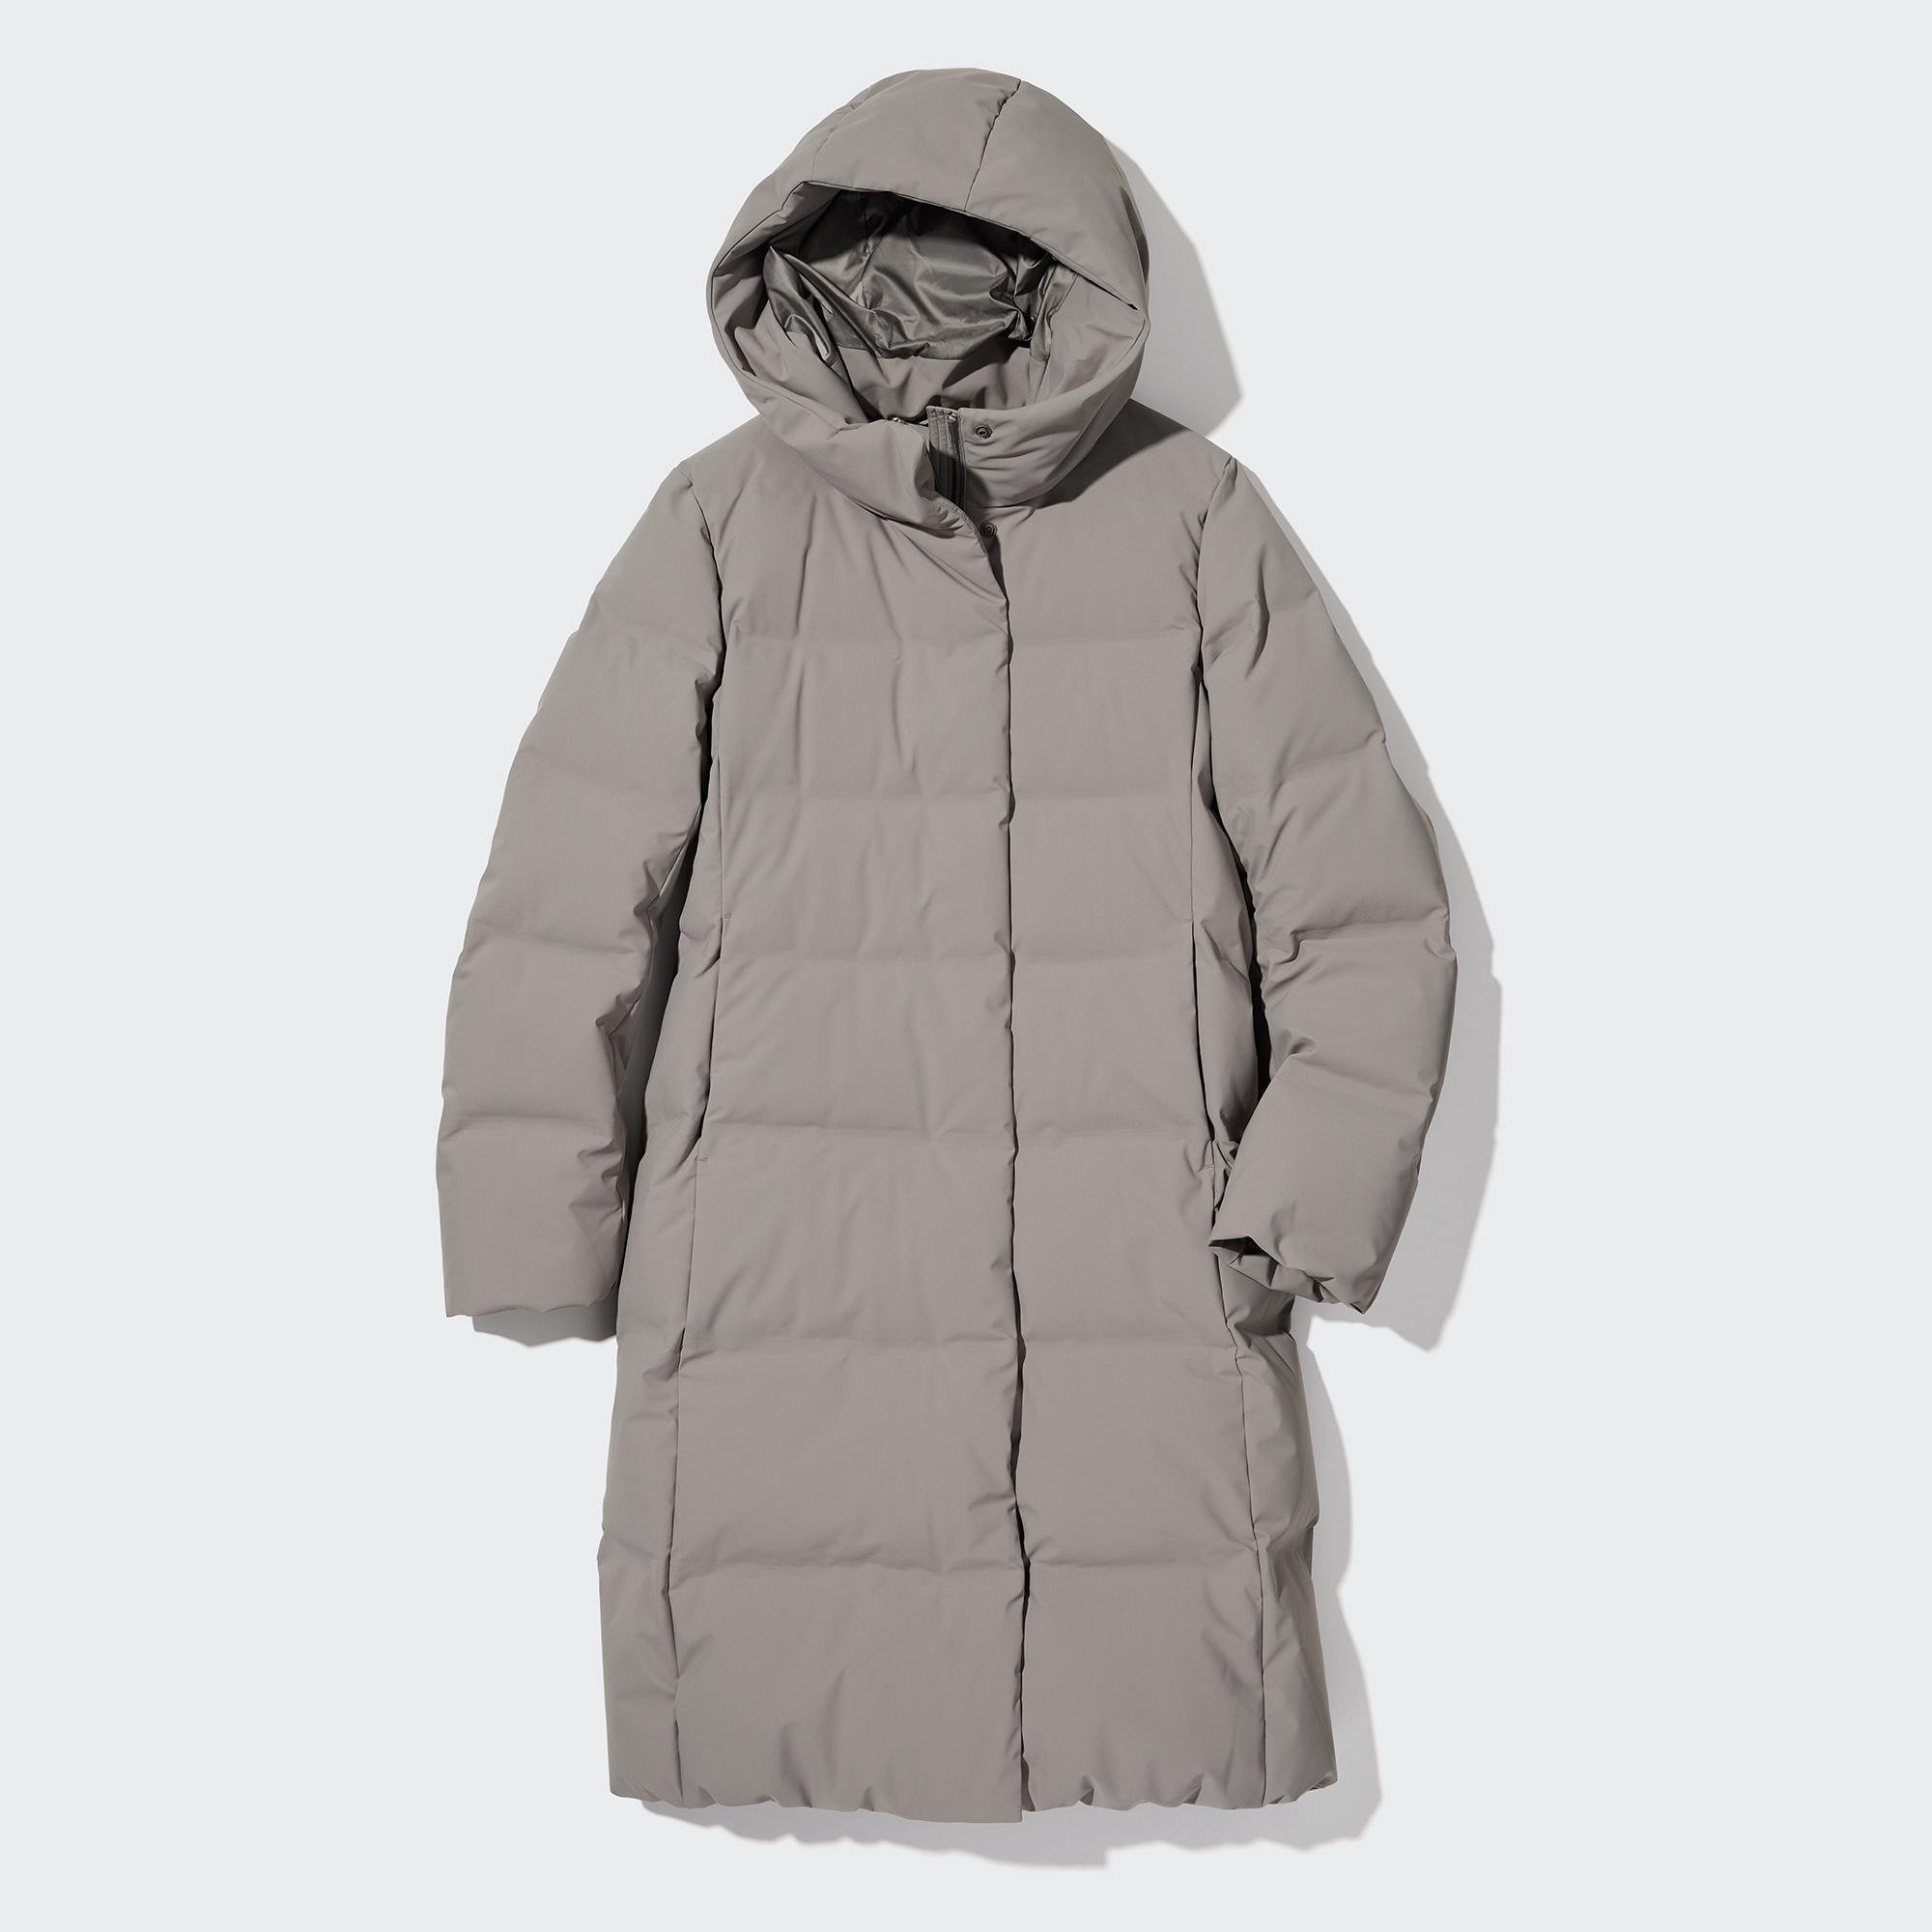 This Winter's Uniqlo Puffer Coats Are In! — With Caveats. Here's Our Review  - The Mom Edit